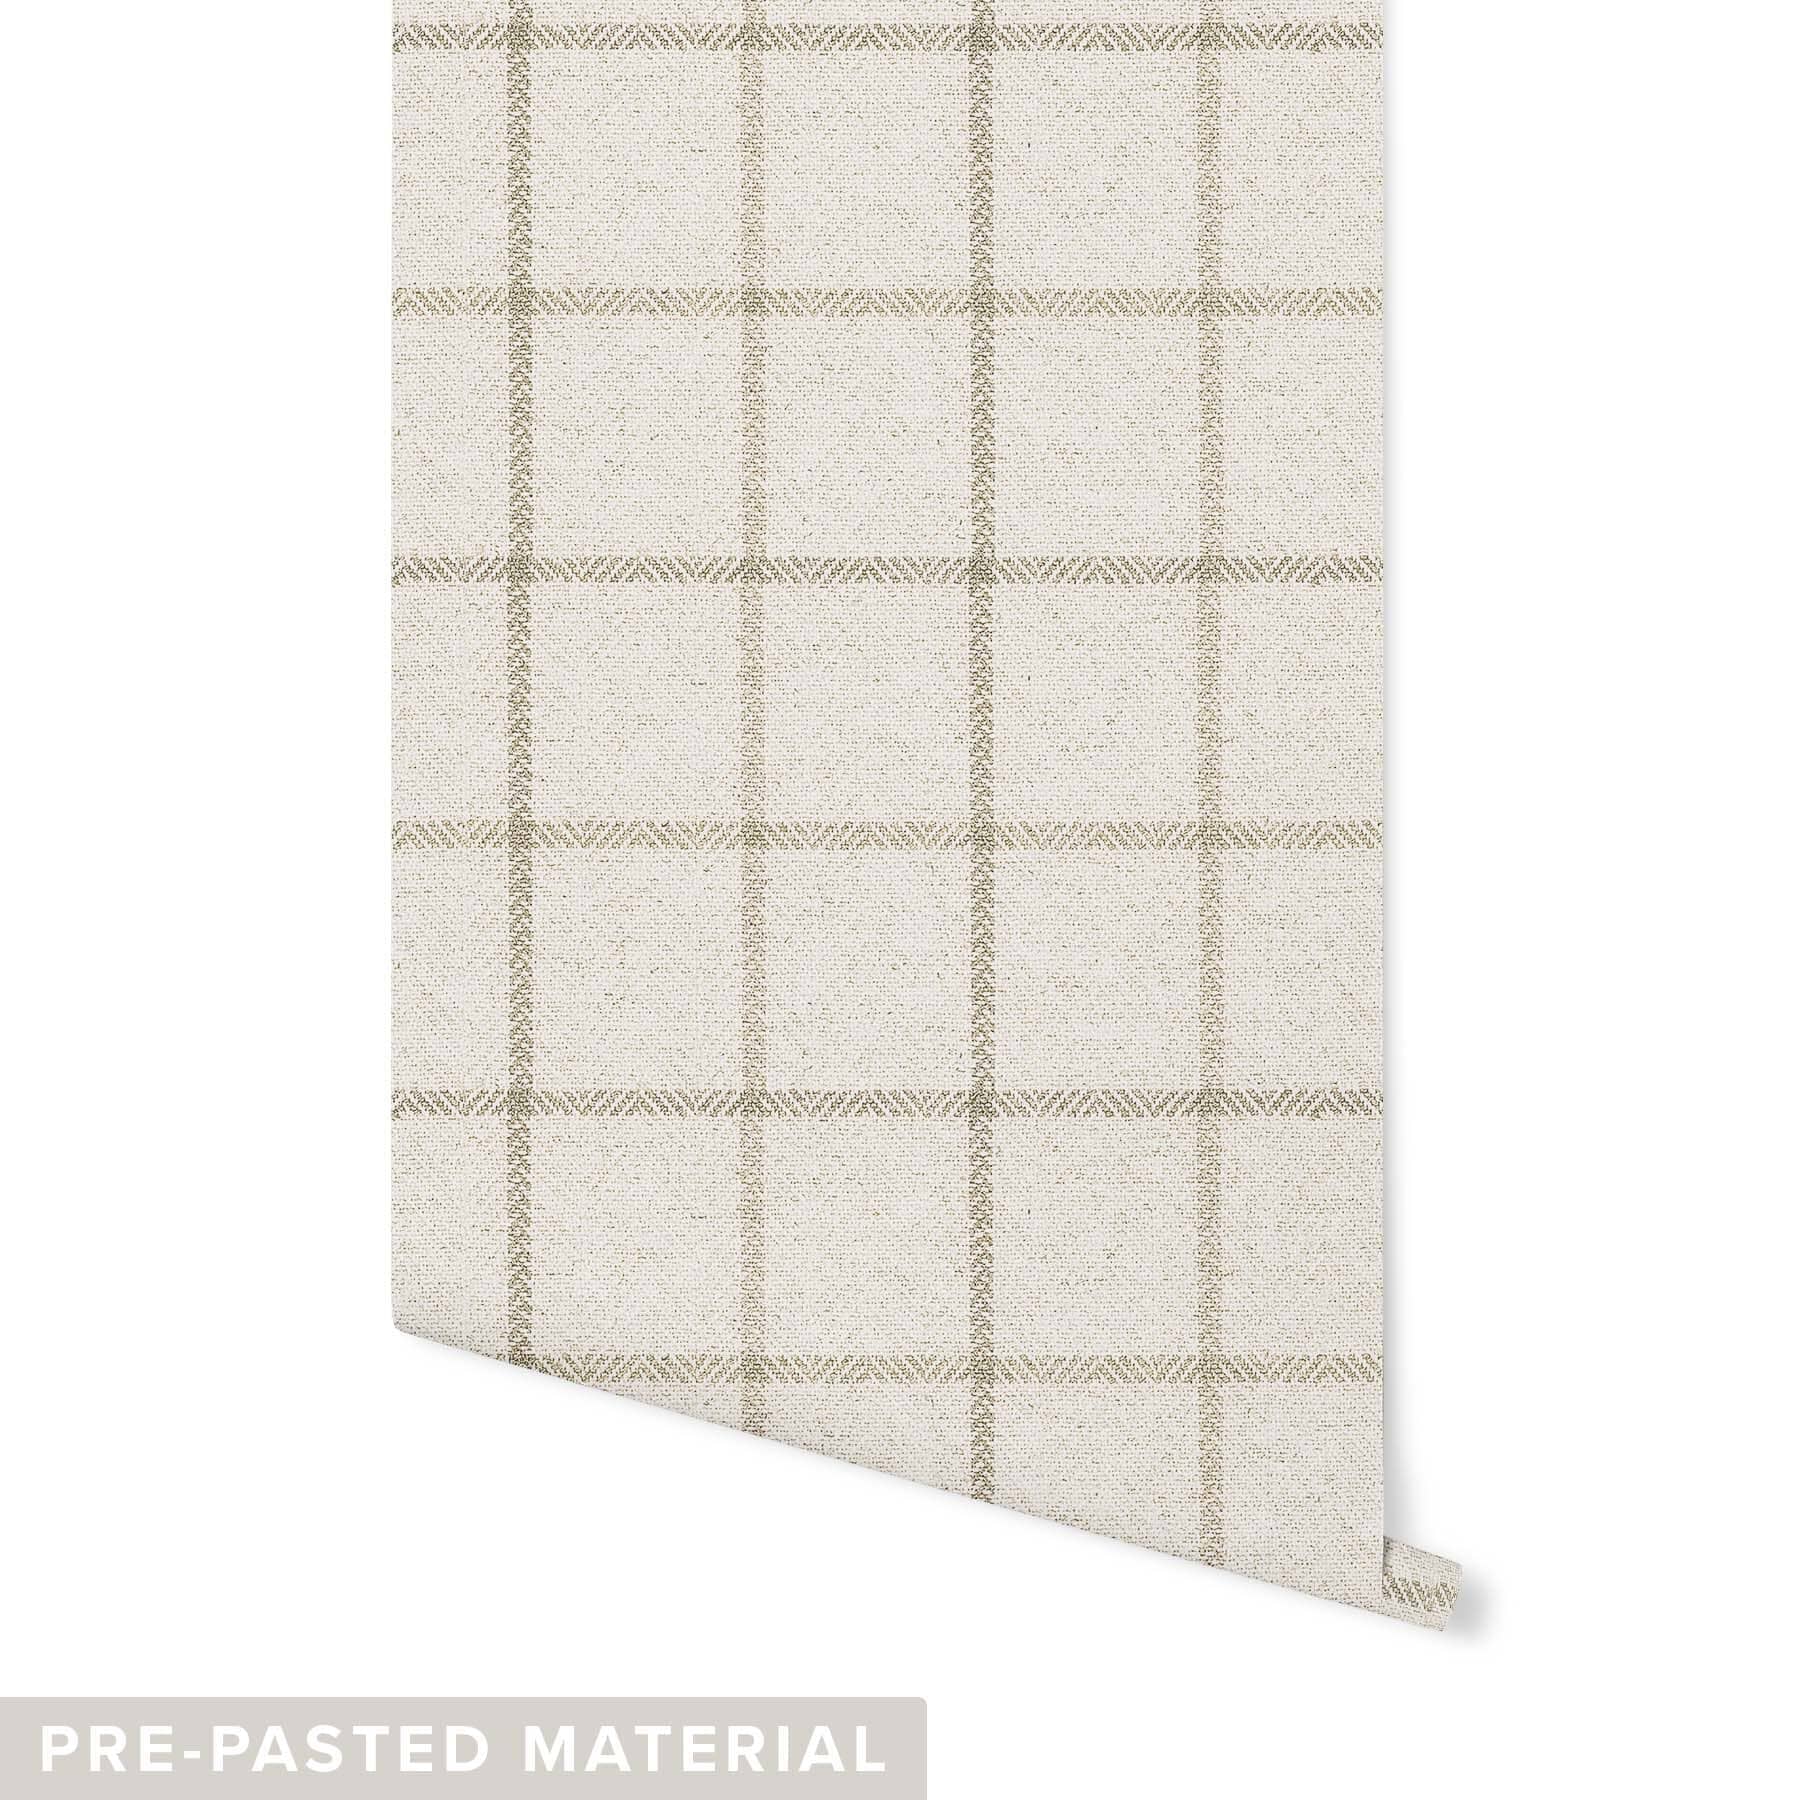 Country Plaid Wallpaper Wallpaper Mia Parres Pre-pasted Light Loon DOUBLE ROLL : 46" X 4 FEET